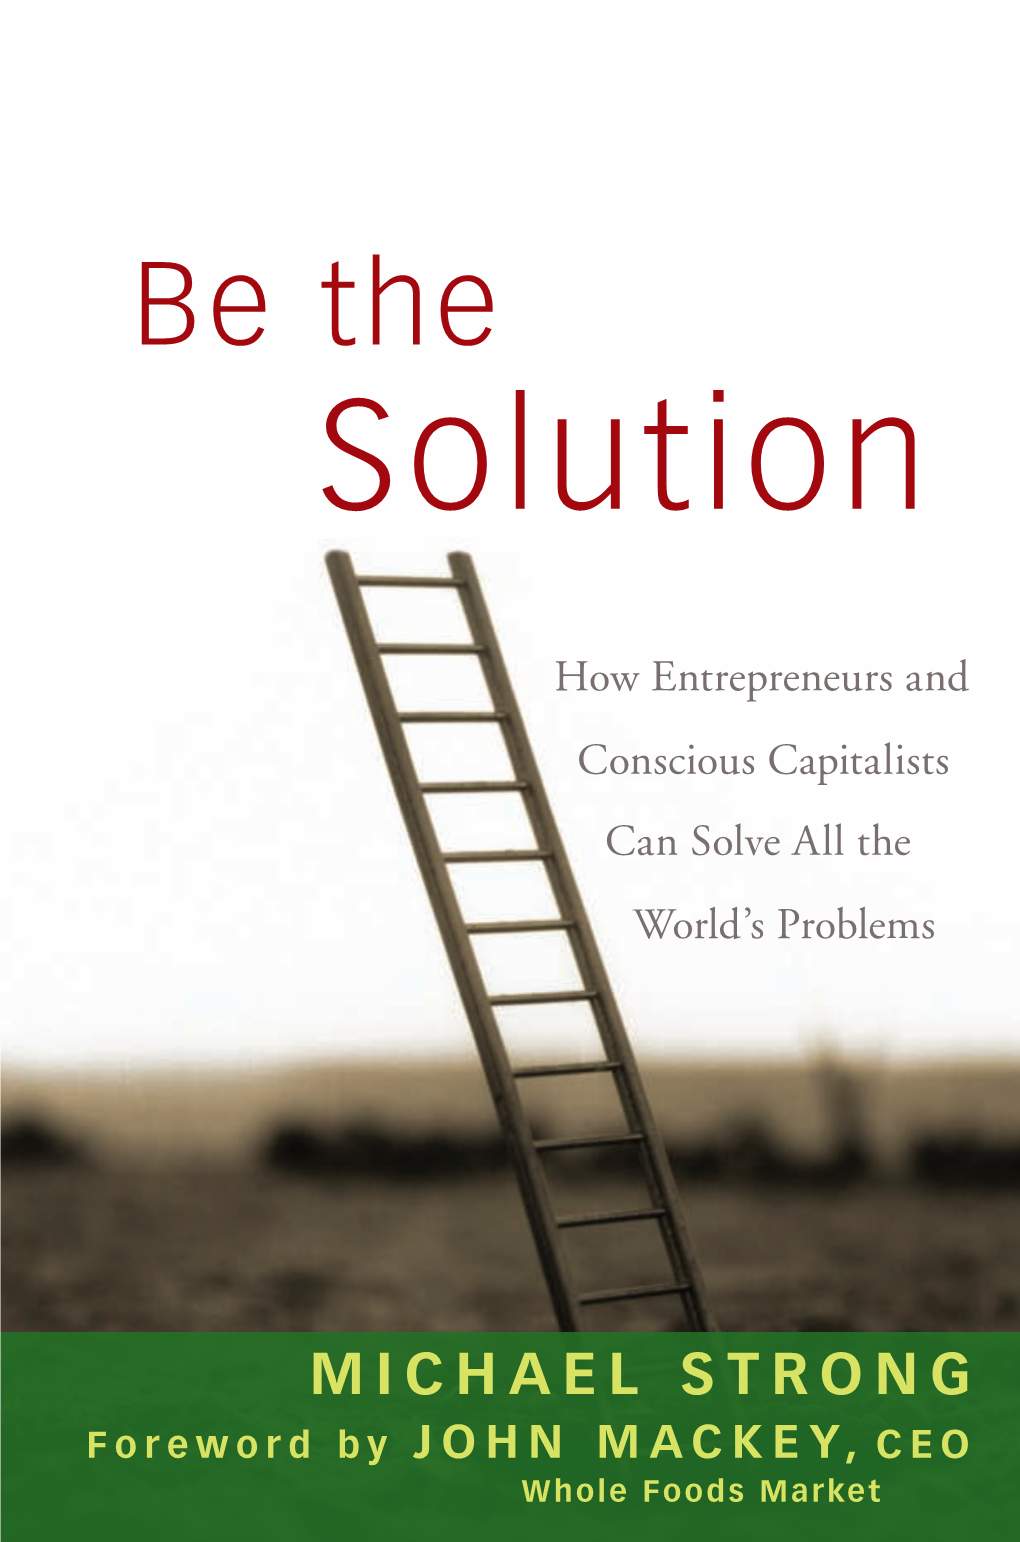 Be the Solution: How Entrepreneurs and Conscious Capitalists Can Solve All the World's Problems